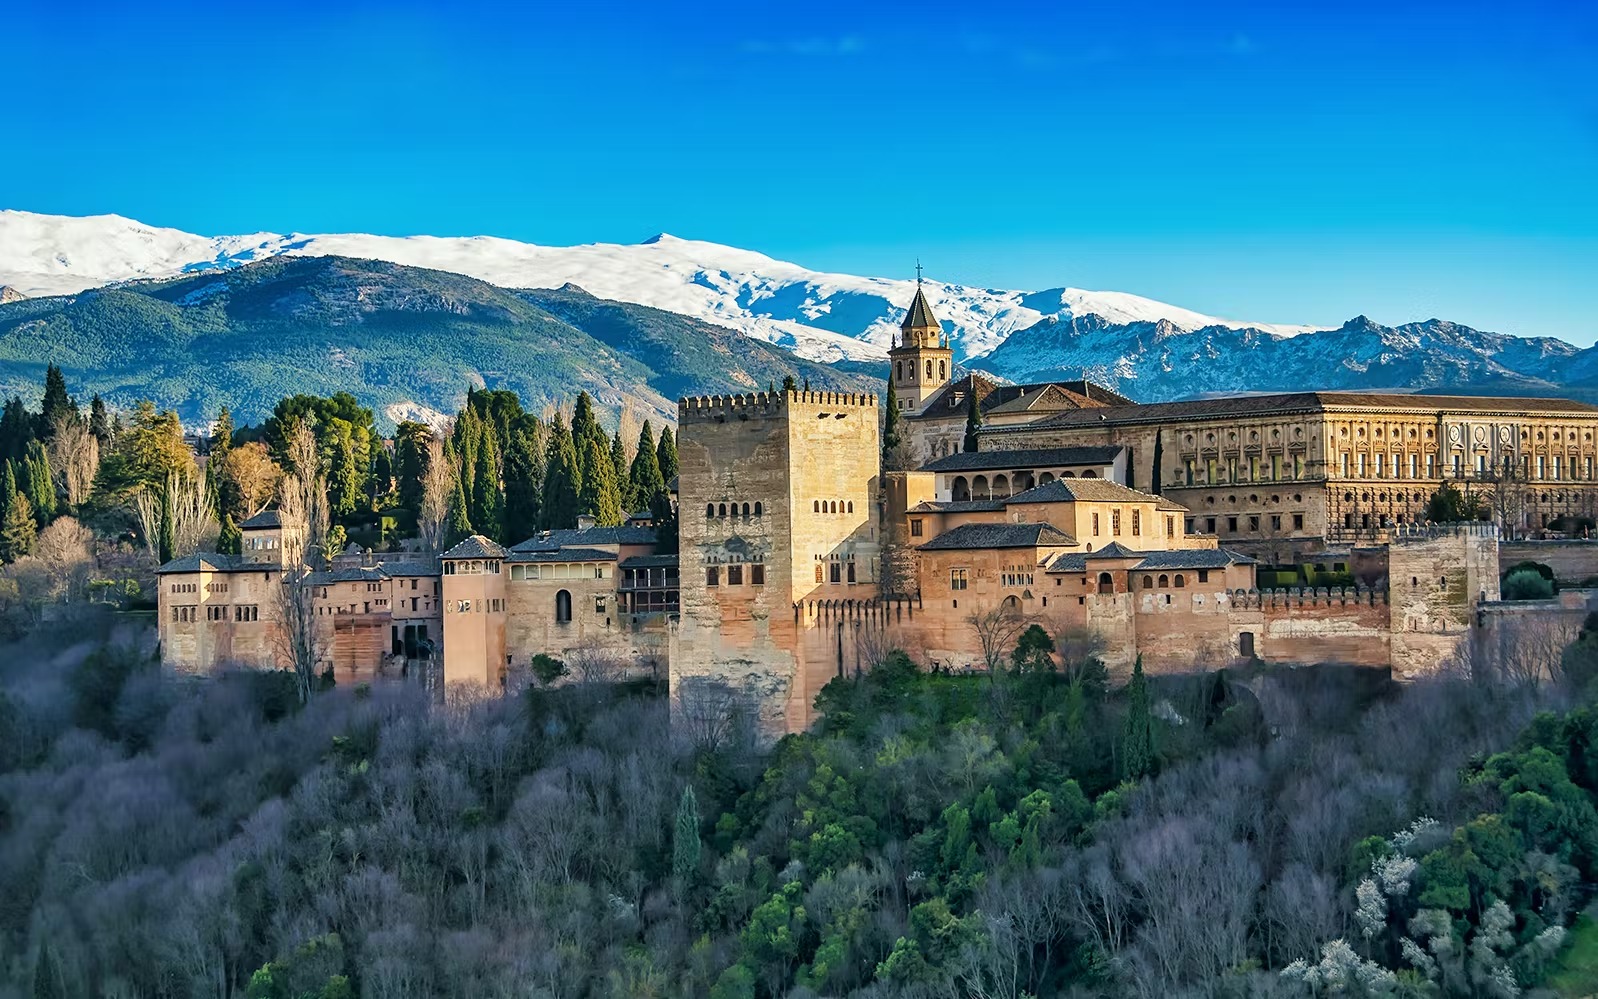 Second Most Famous Sights Alhambra, Granada, Spain